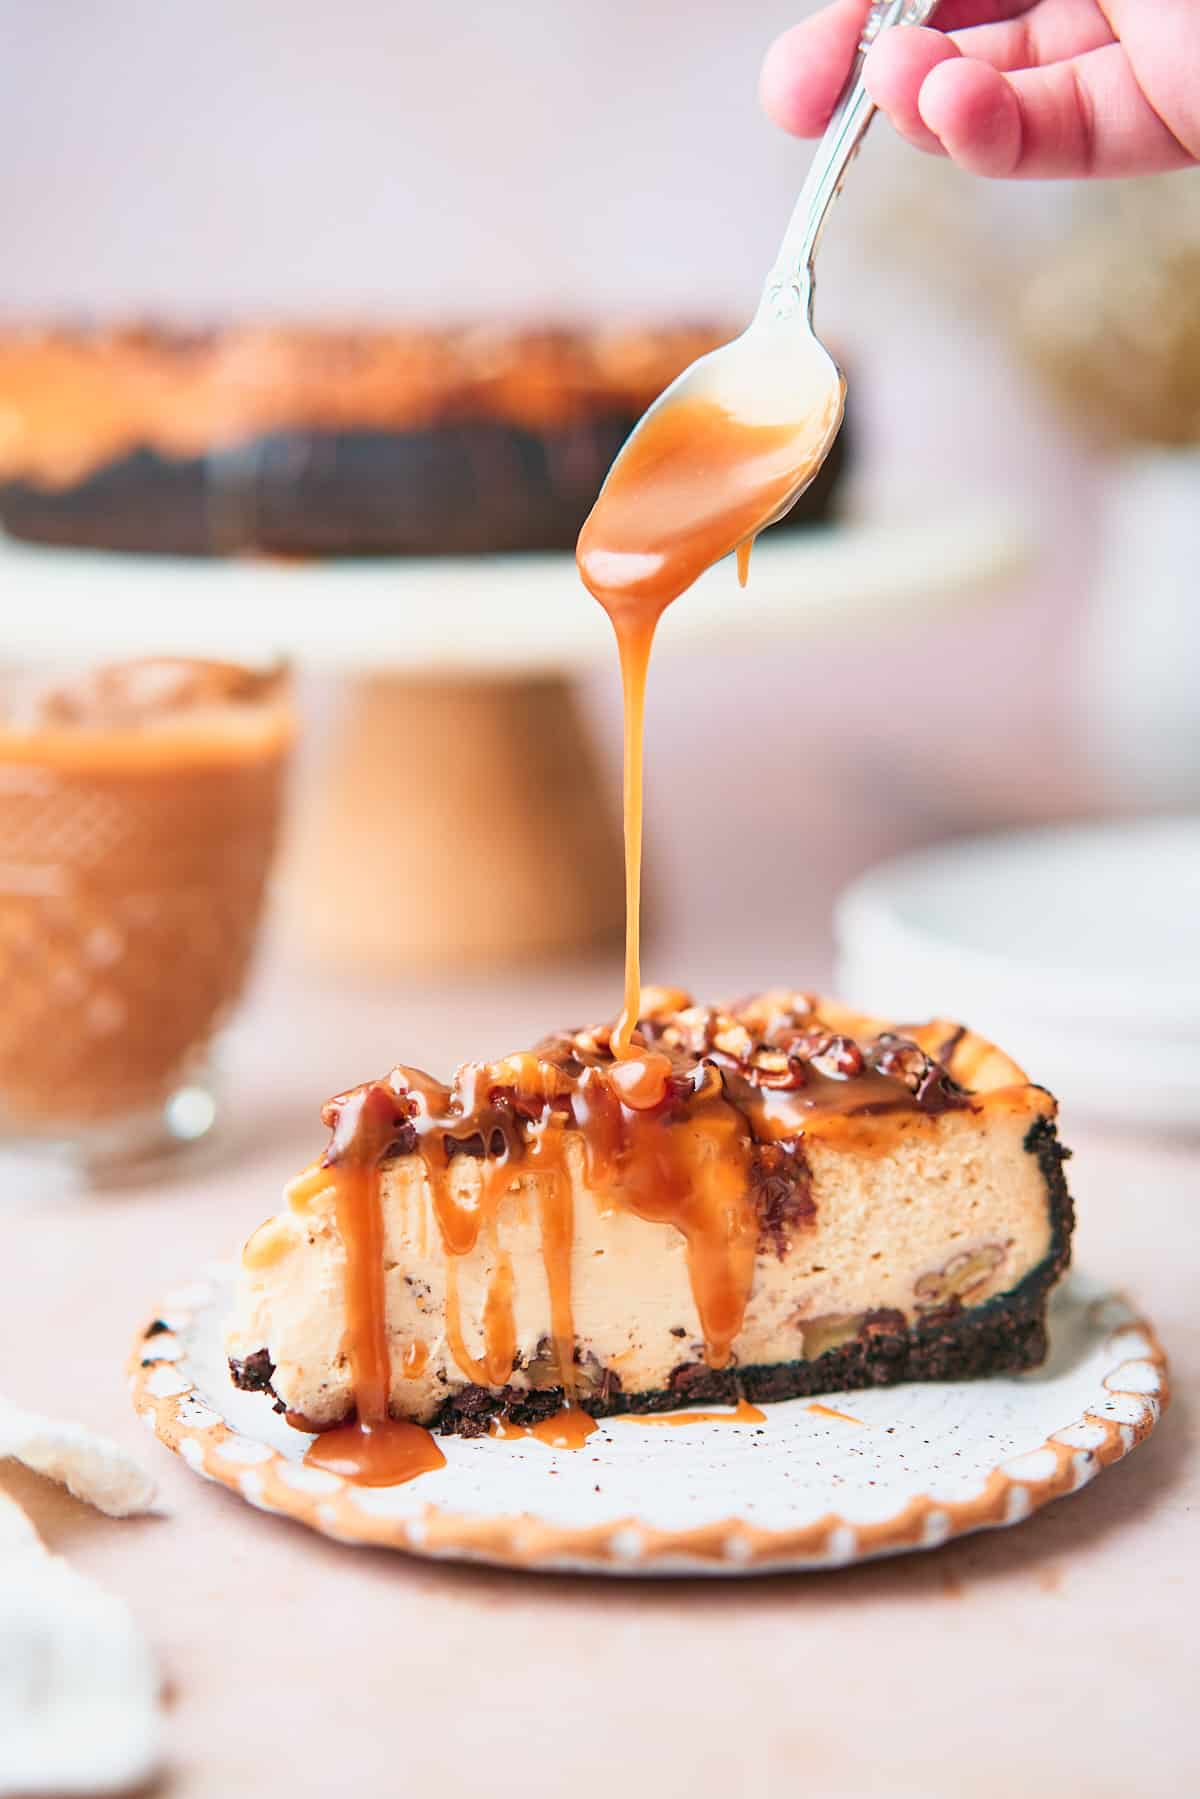 luscious slice of turtle cheesecake on a plate, with the full cheesecake in the background and a hand drizzling caramel sauce onto the cheesecake. 